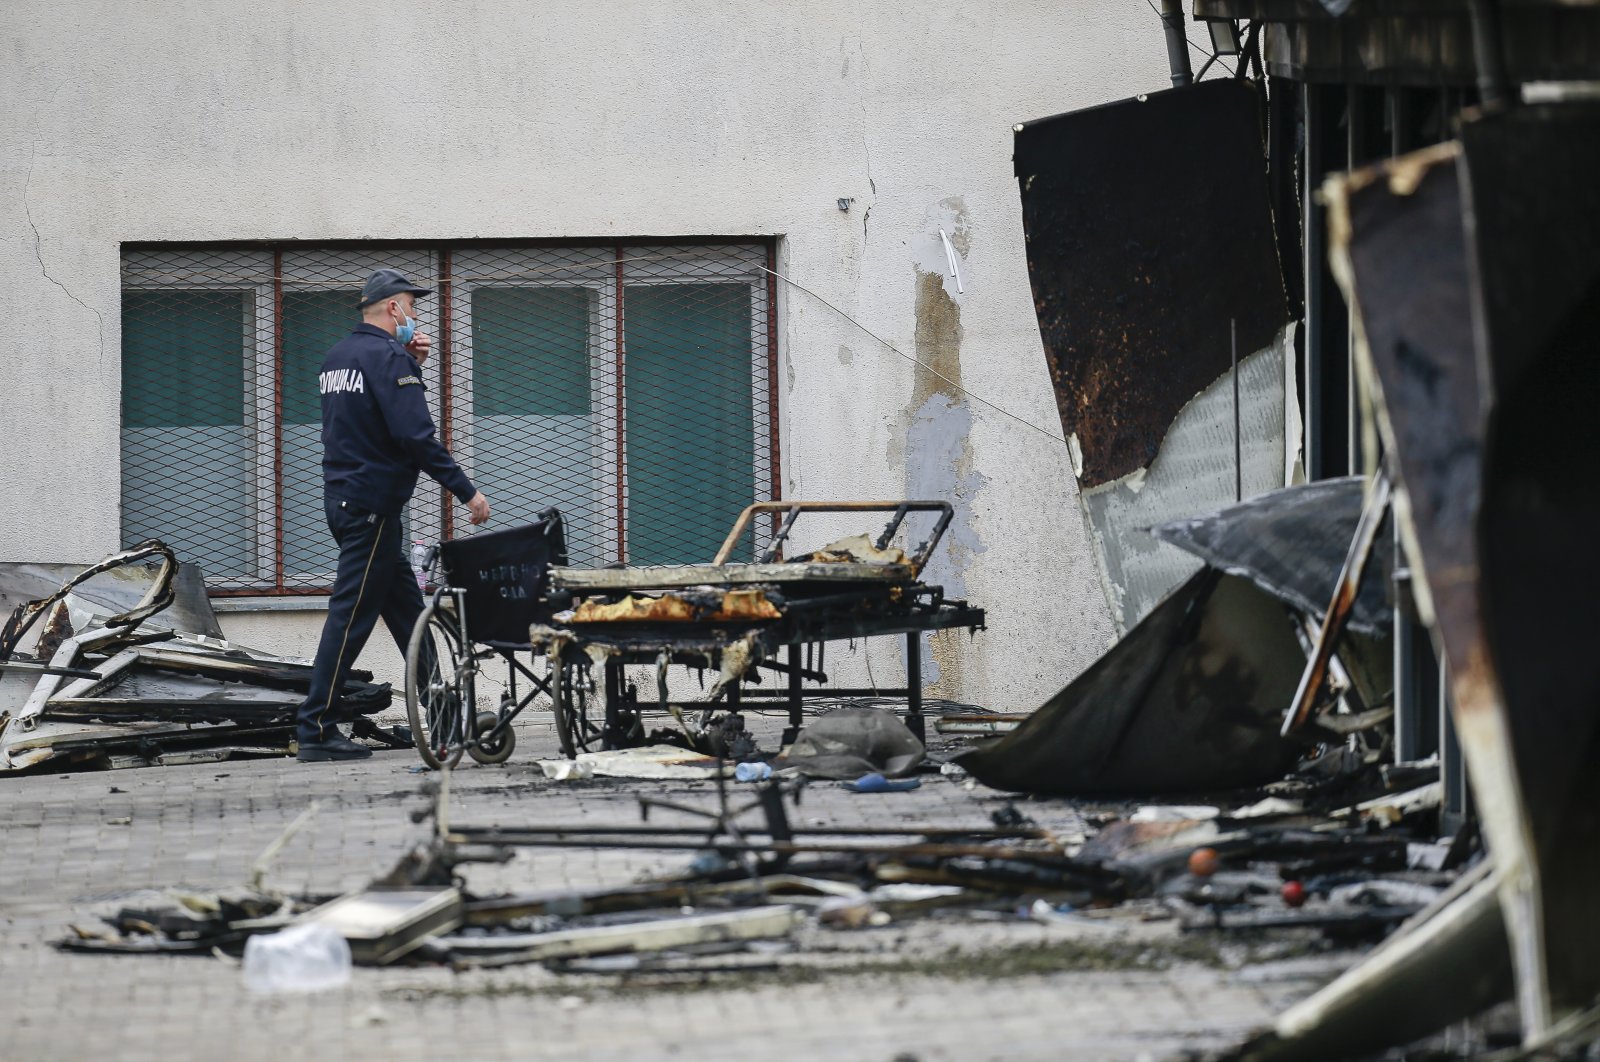 A police officer walks past burned hospital equipment on the site of a destroyed field hospital following a fire in Tetovo, North Macedonia, Sept. 9, 2021. (AP Photo)